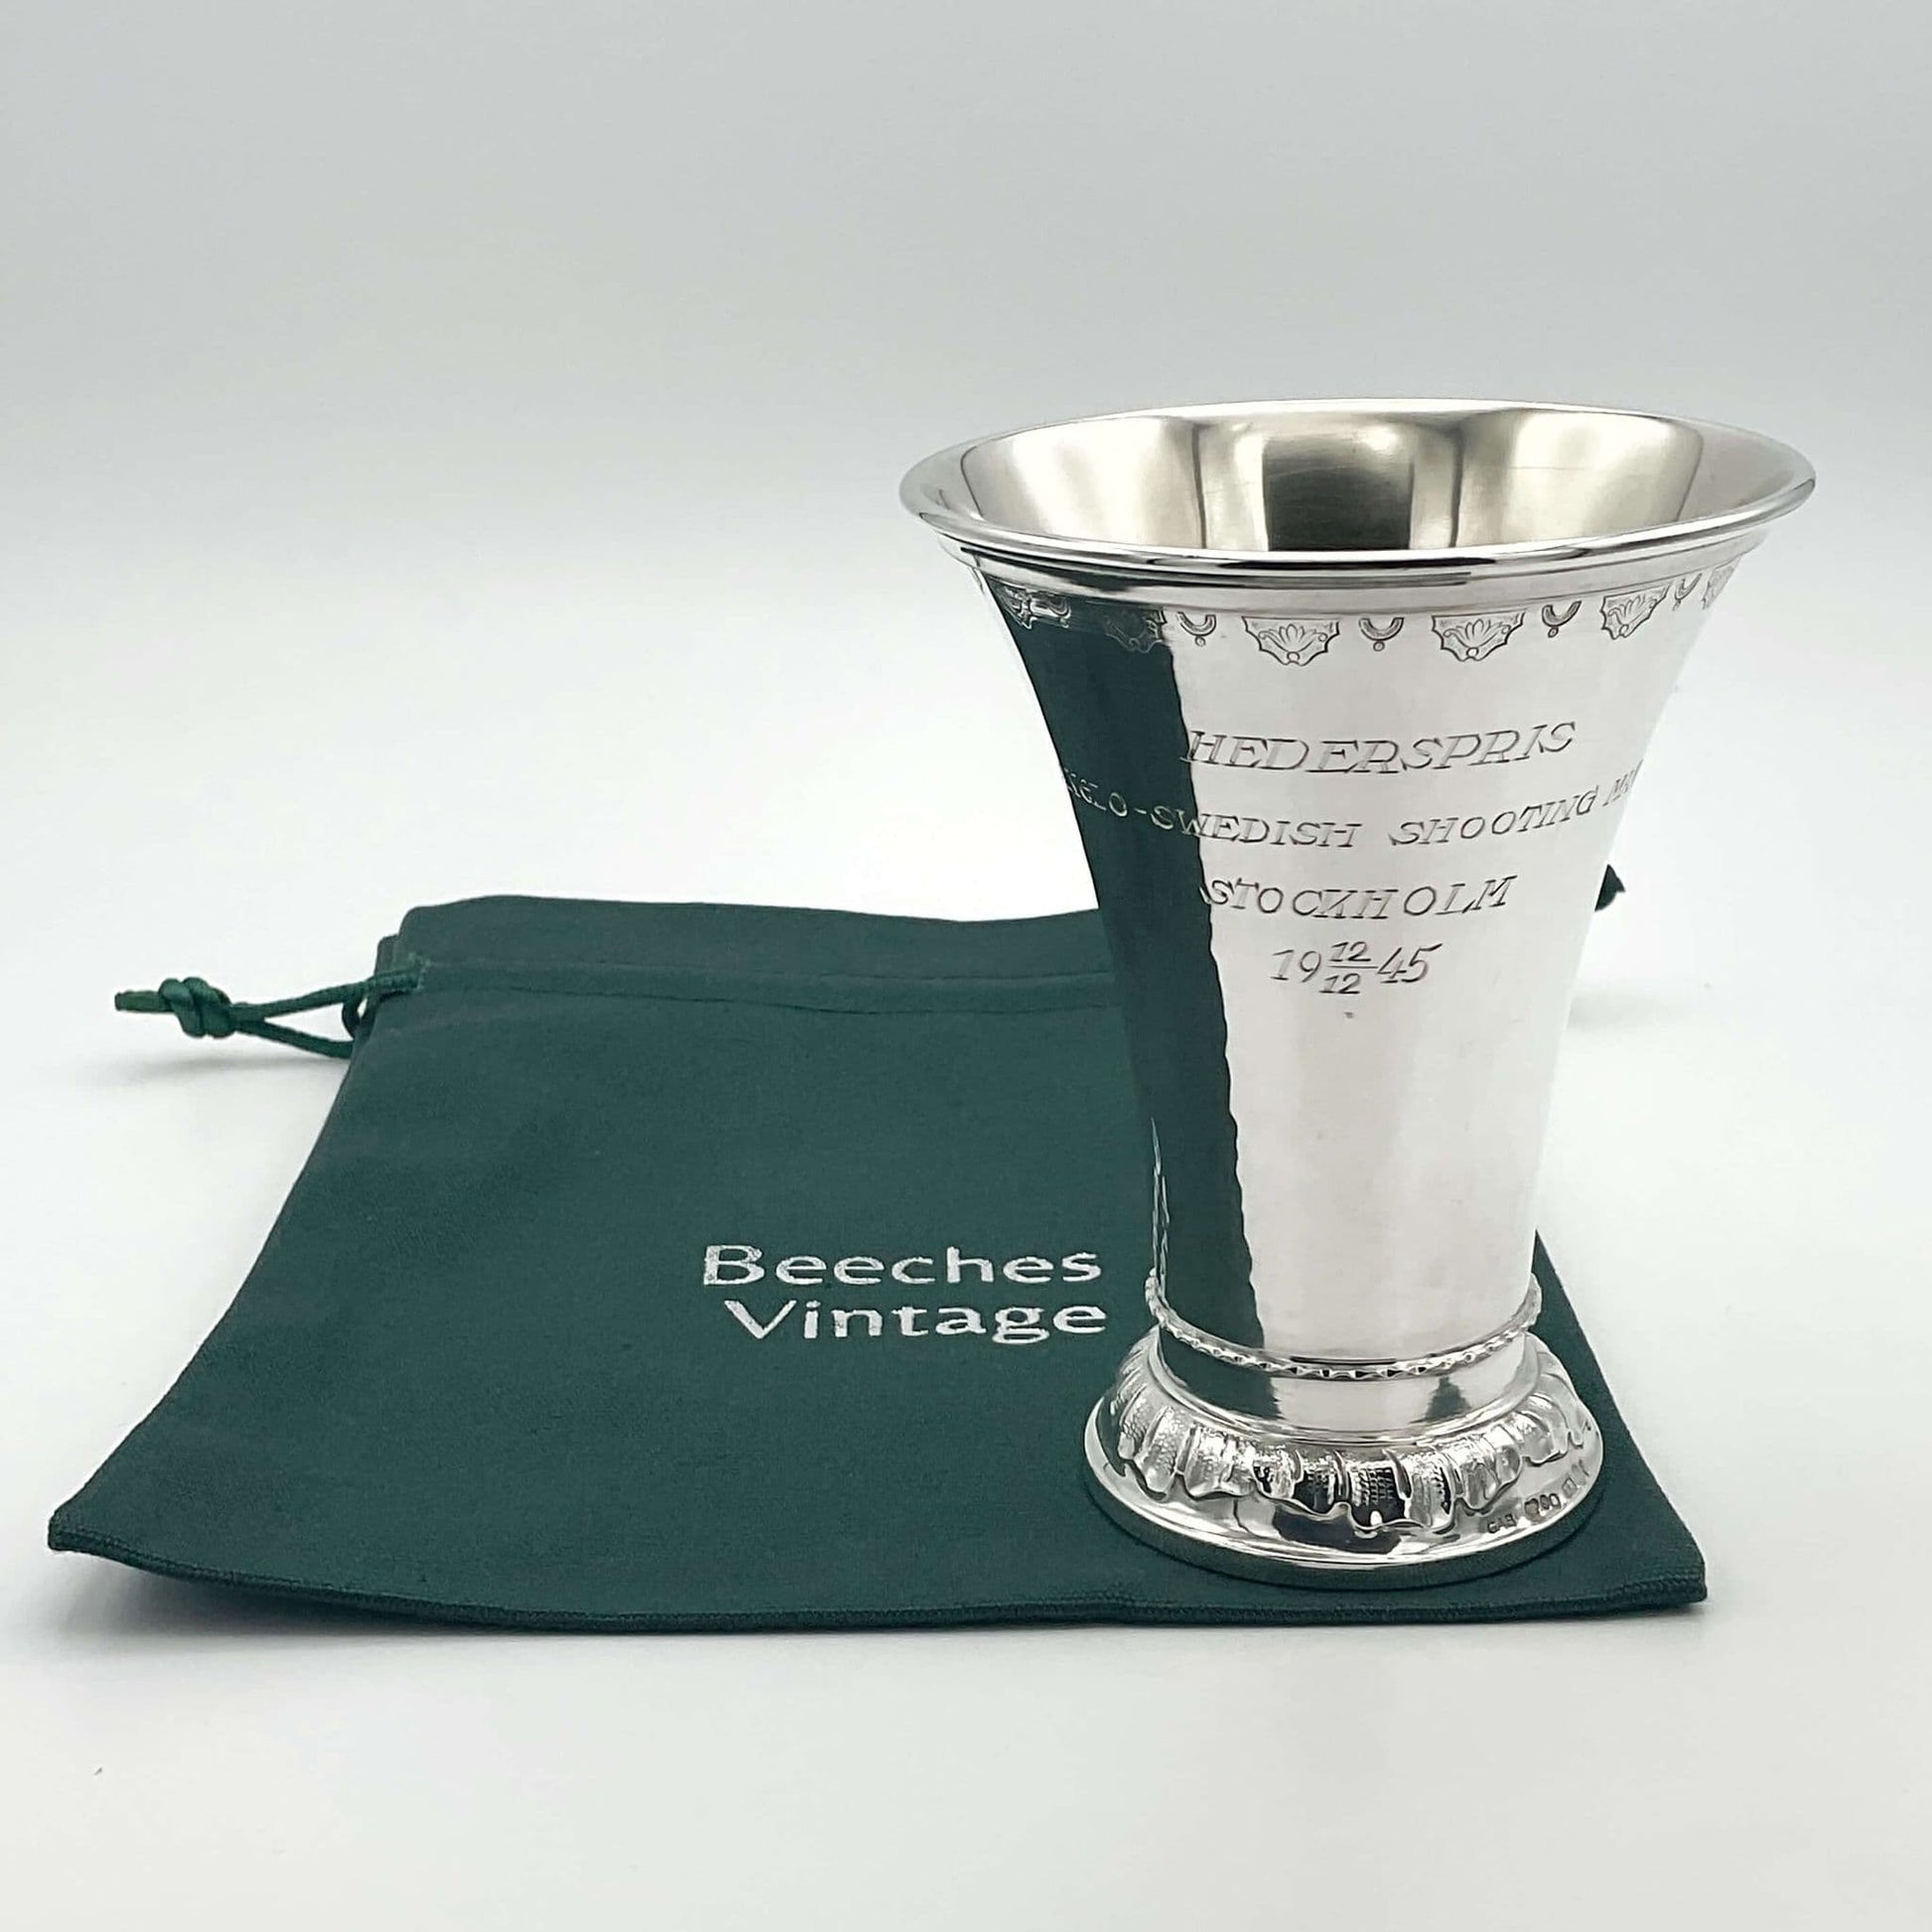 Silver fluted shape vase or cup standing on a green Beeches Vintage cotton bag. The vase has Hederspris Anglo - Swedish Shooting Match Stockholm 12/12 1945 engraved in the centre.